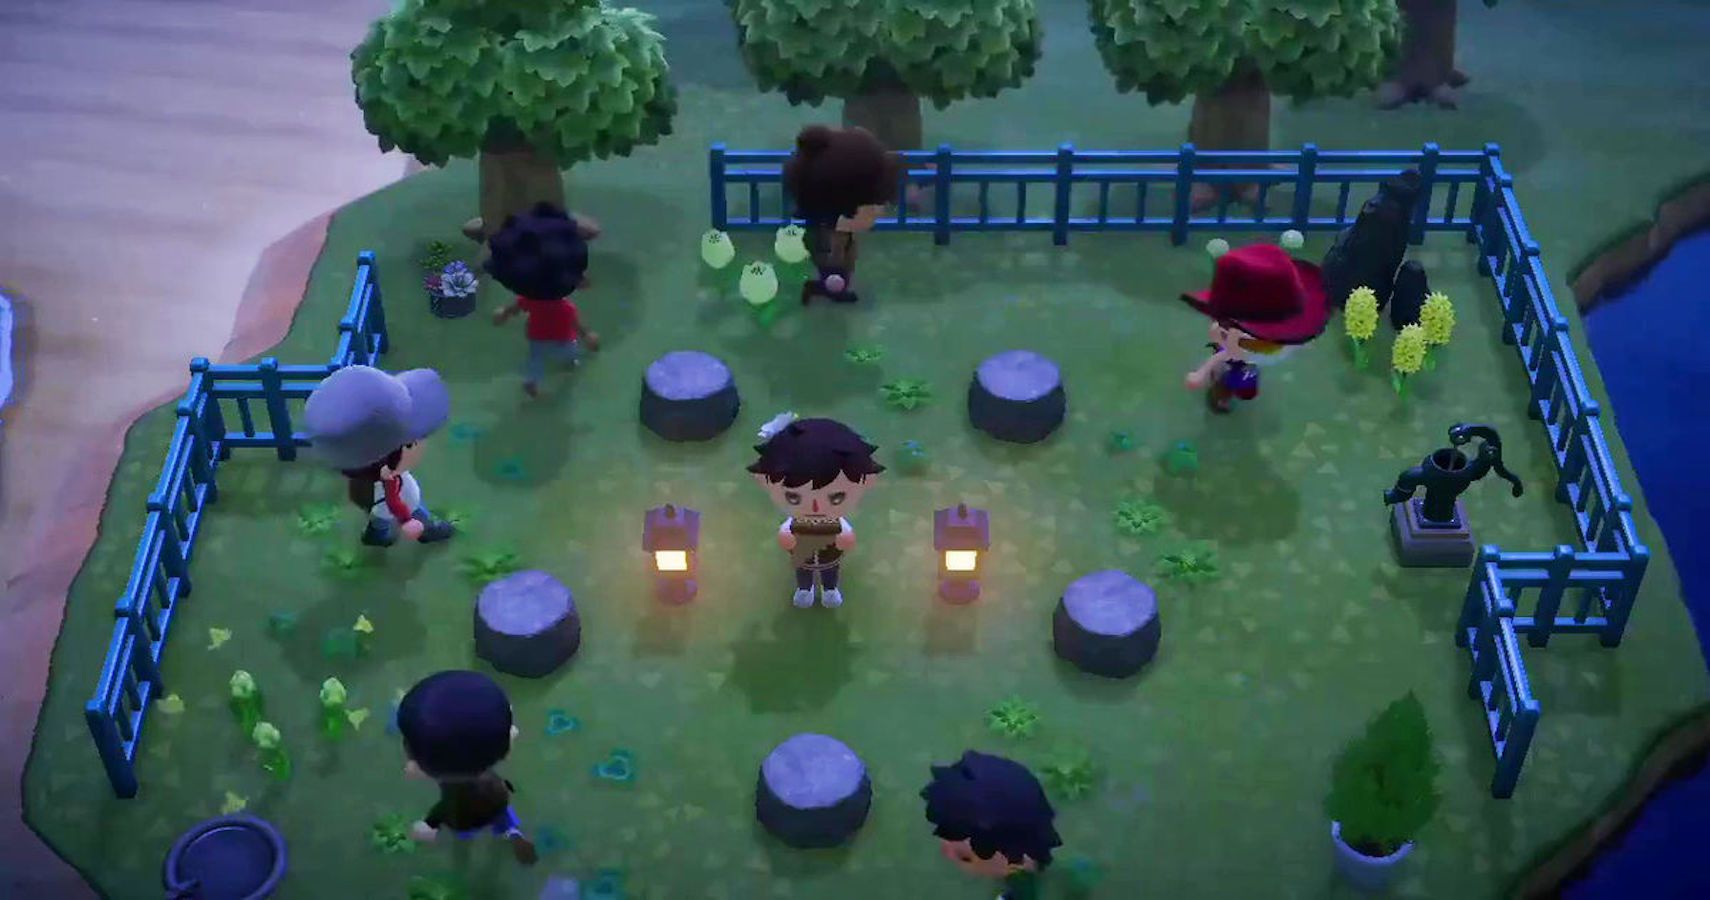 People Have Been Playing Musical Chairs in Animal Crossing New Horizons